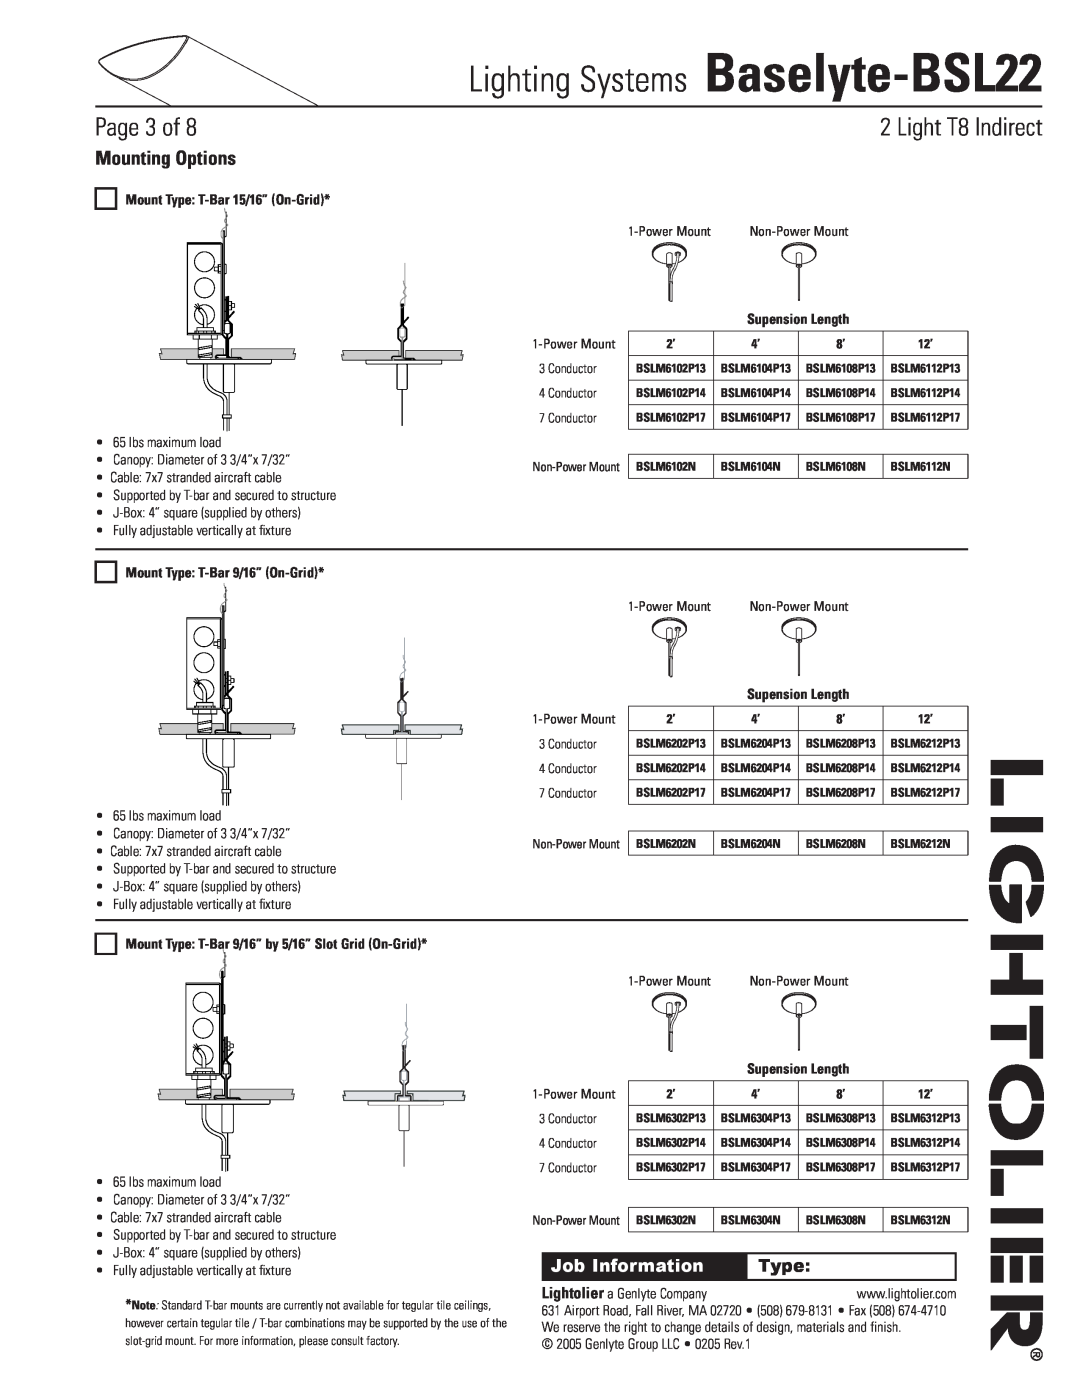 Lightolier Baselyte-BSL22 Mounting Options, Mount Type T-Bar15/16” On-Grid, Supension Length, Page of, Light T8 Indirect 